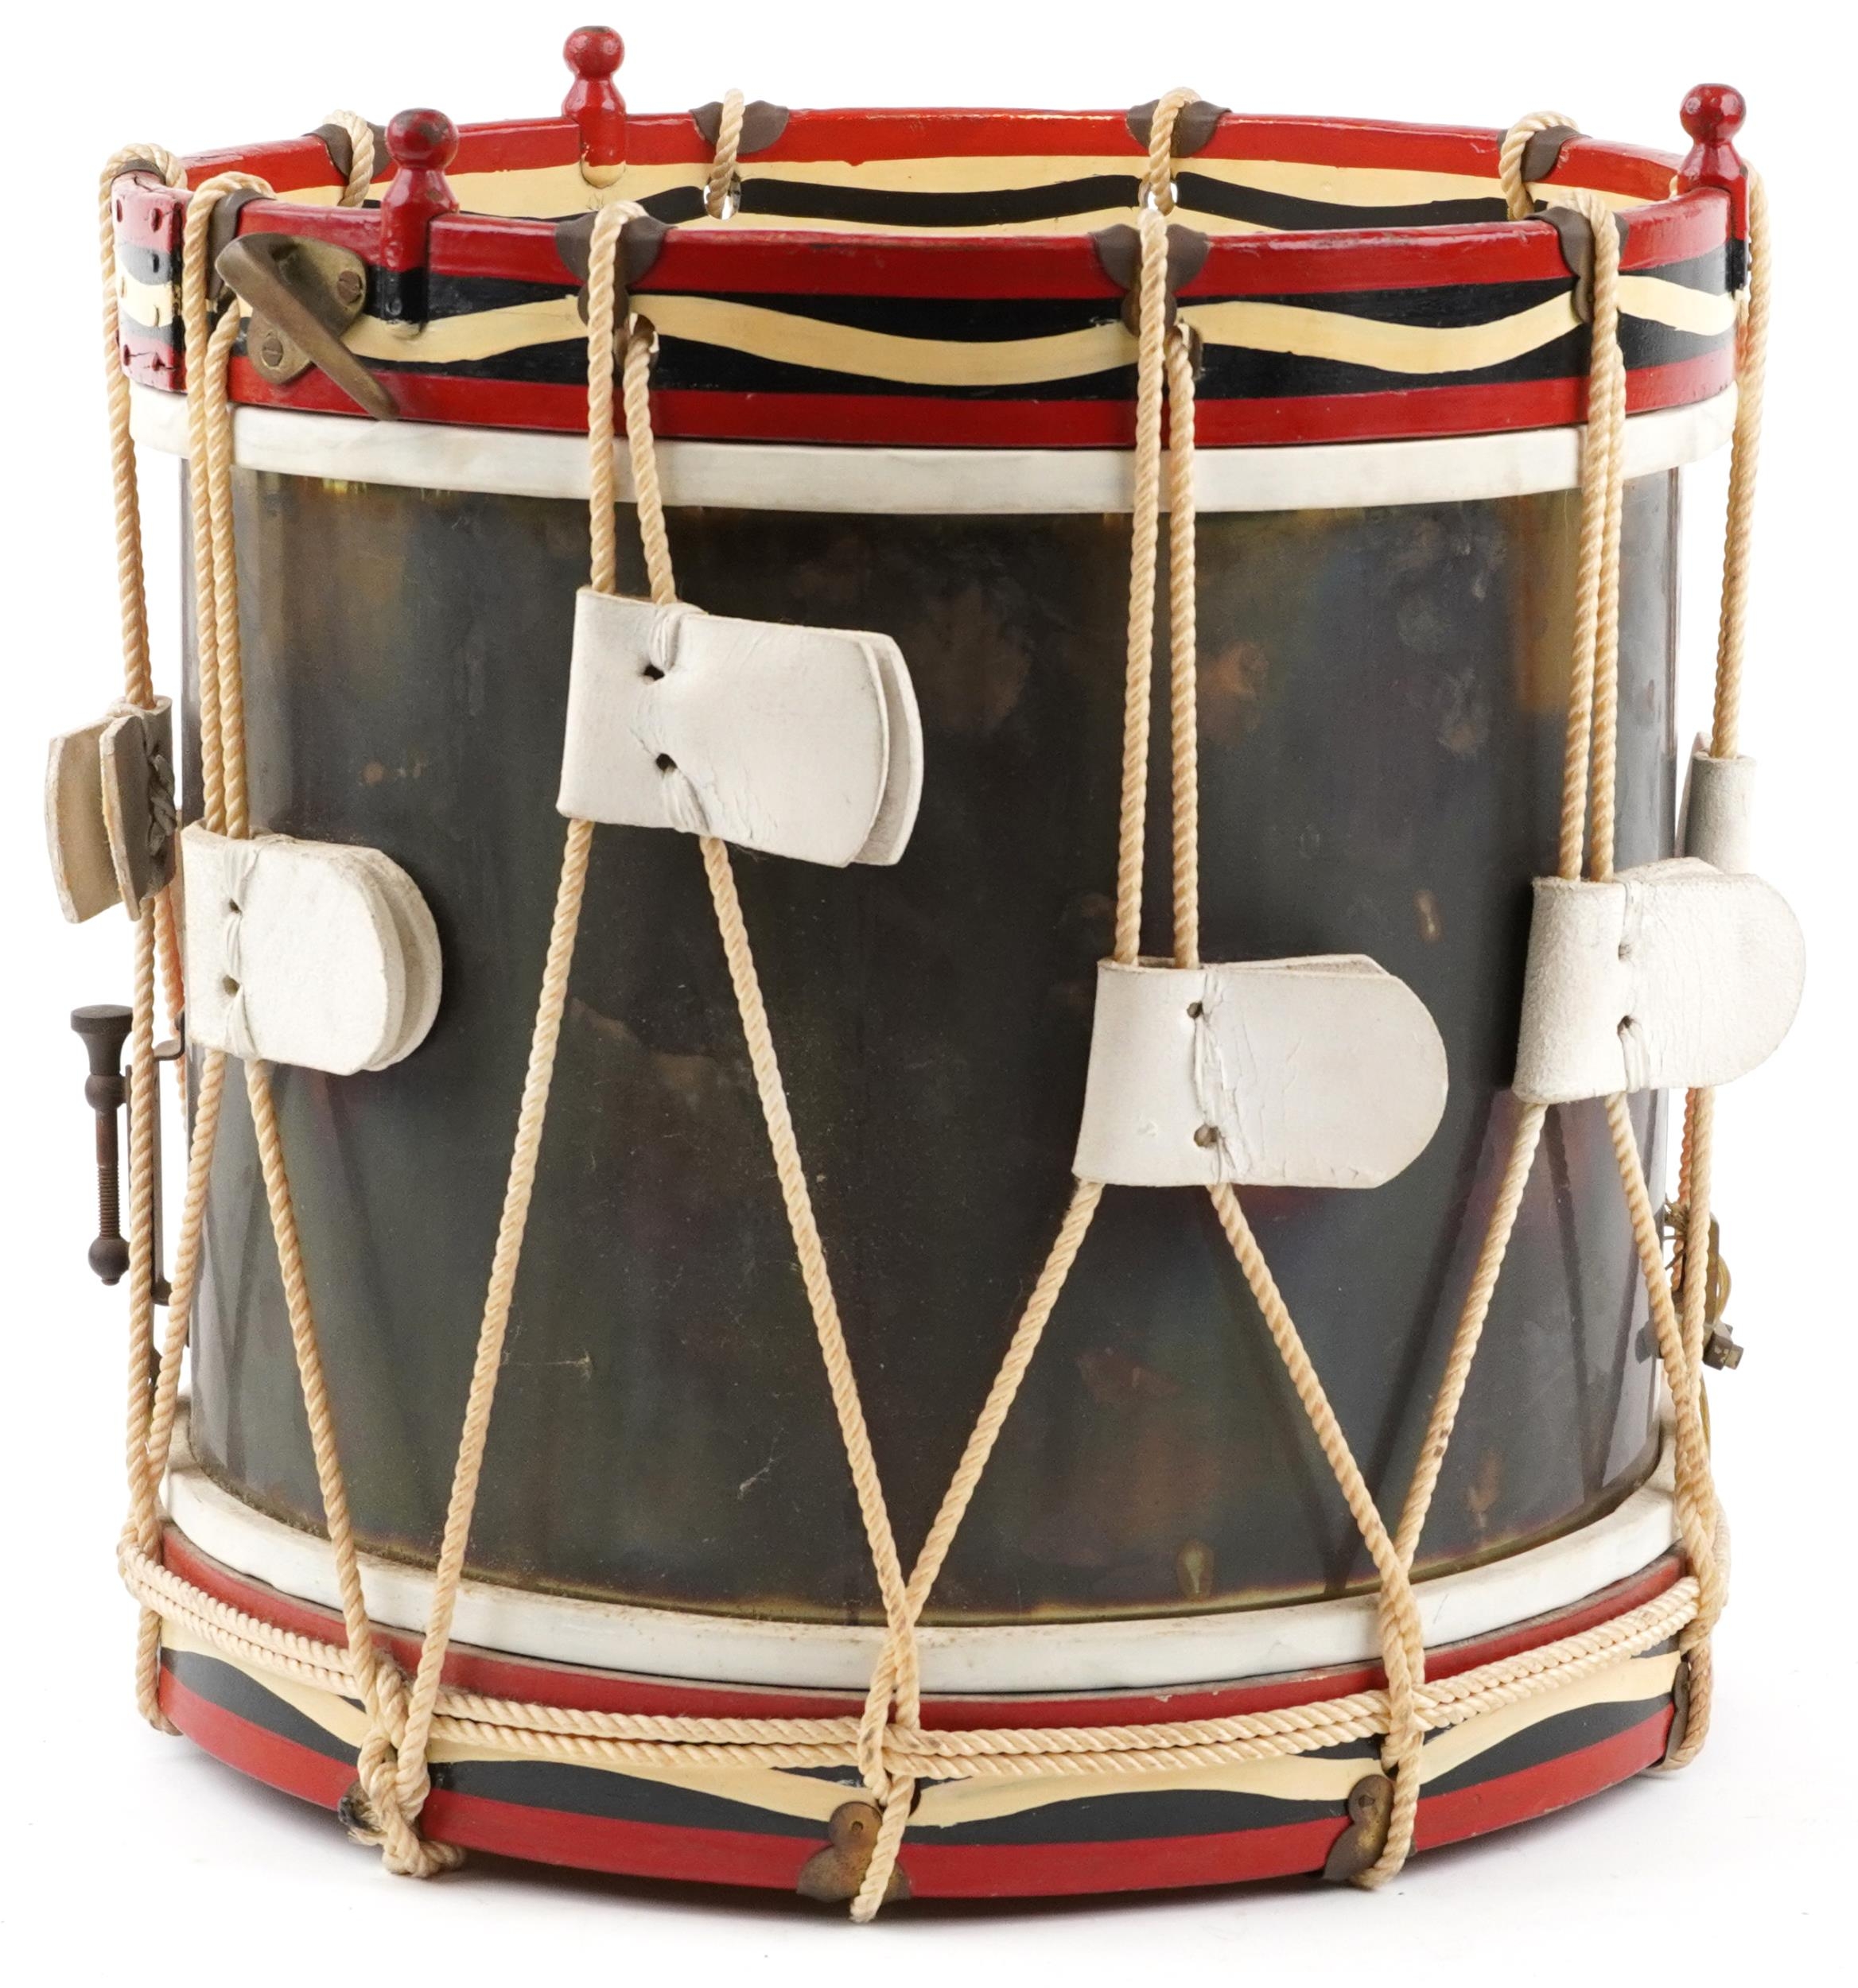 British military George VI Royal Marine Depot side drum with hand painted motifs, 39cm high x 37.5cm - Image 3 of 4